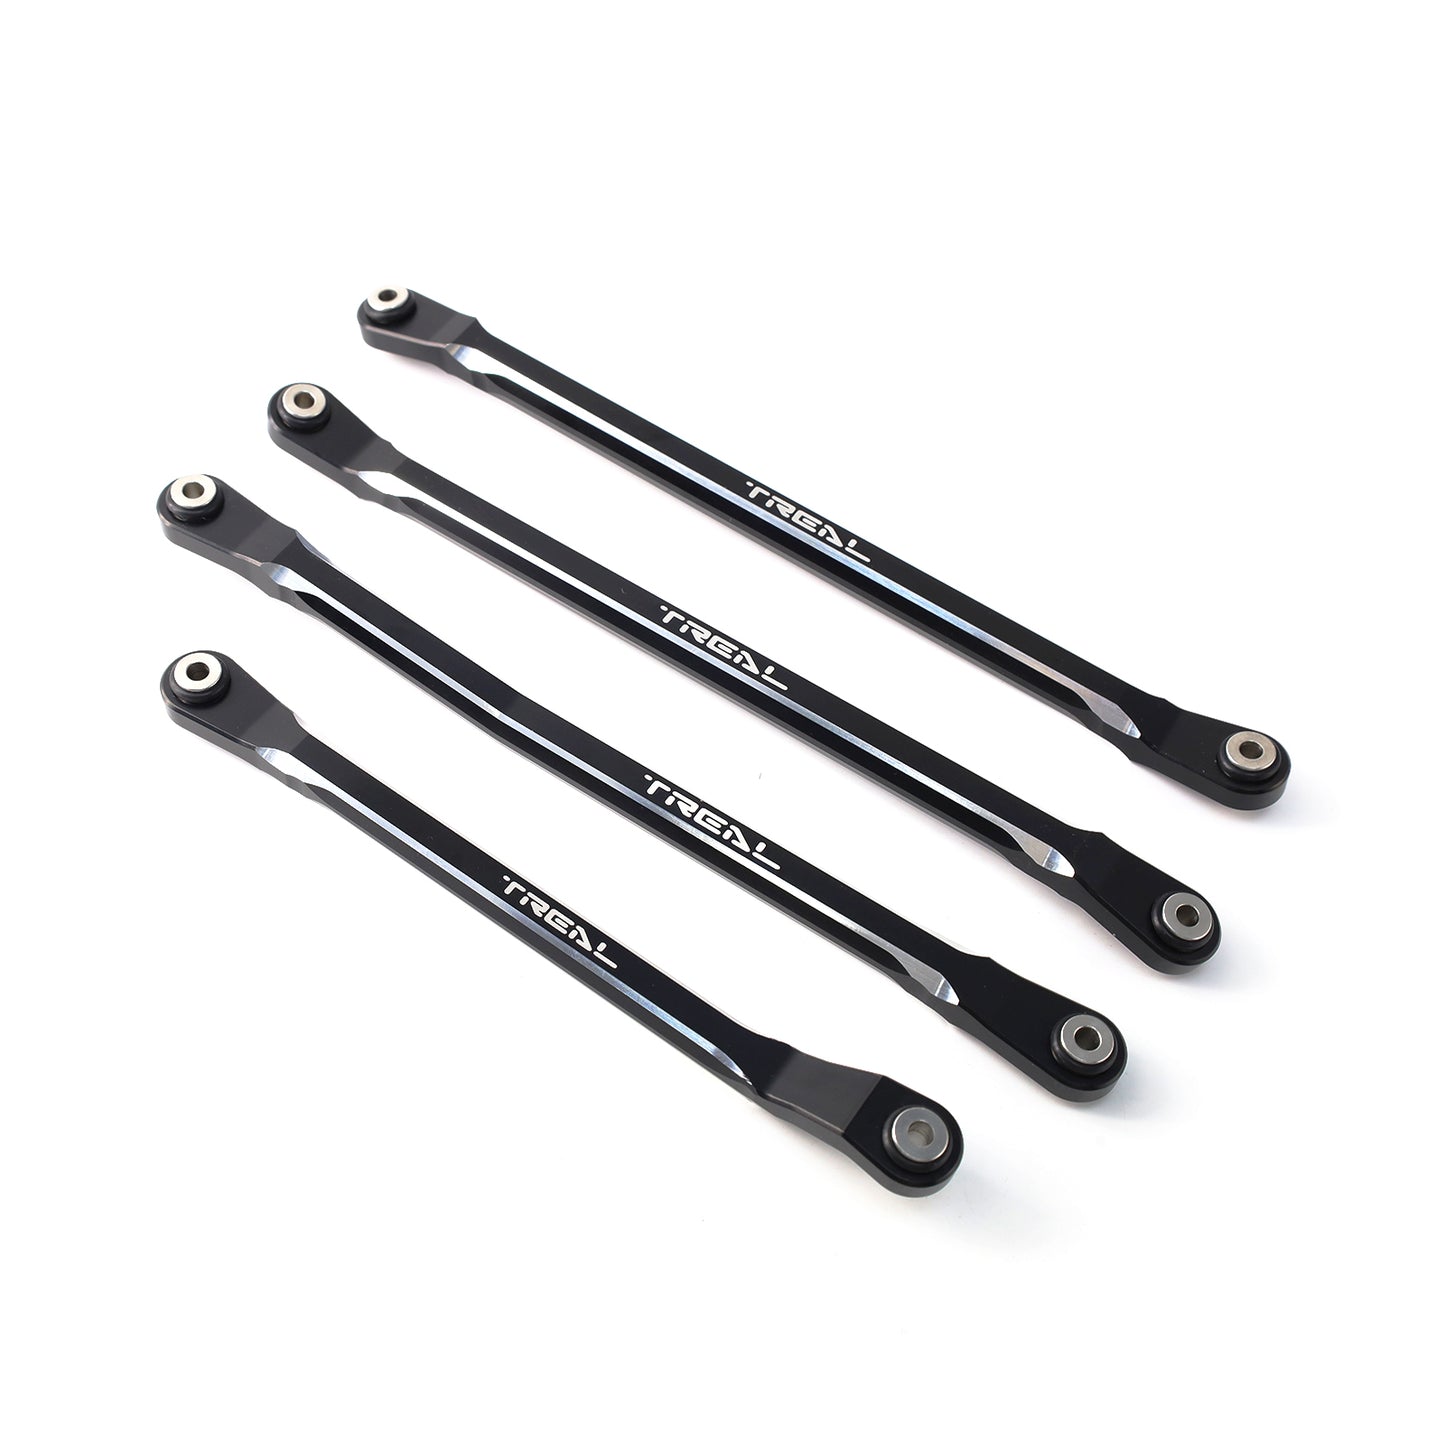 TREAL SCX6 Upper Links Set (4) Aluminum 7075 Rod Link Replacements for Axial SCX6